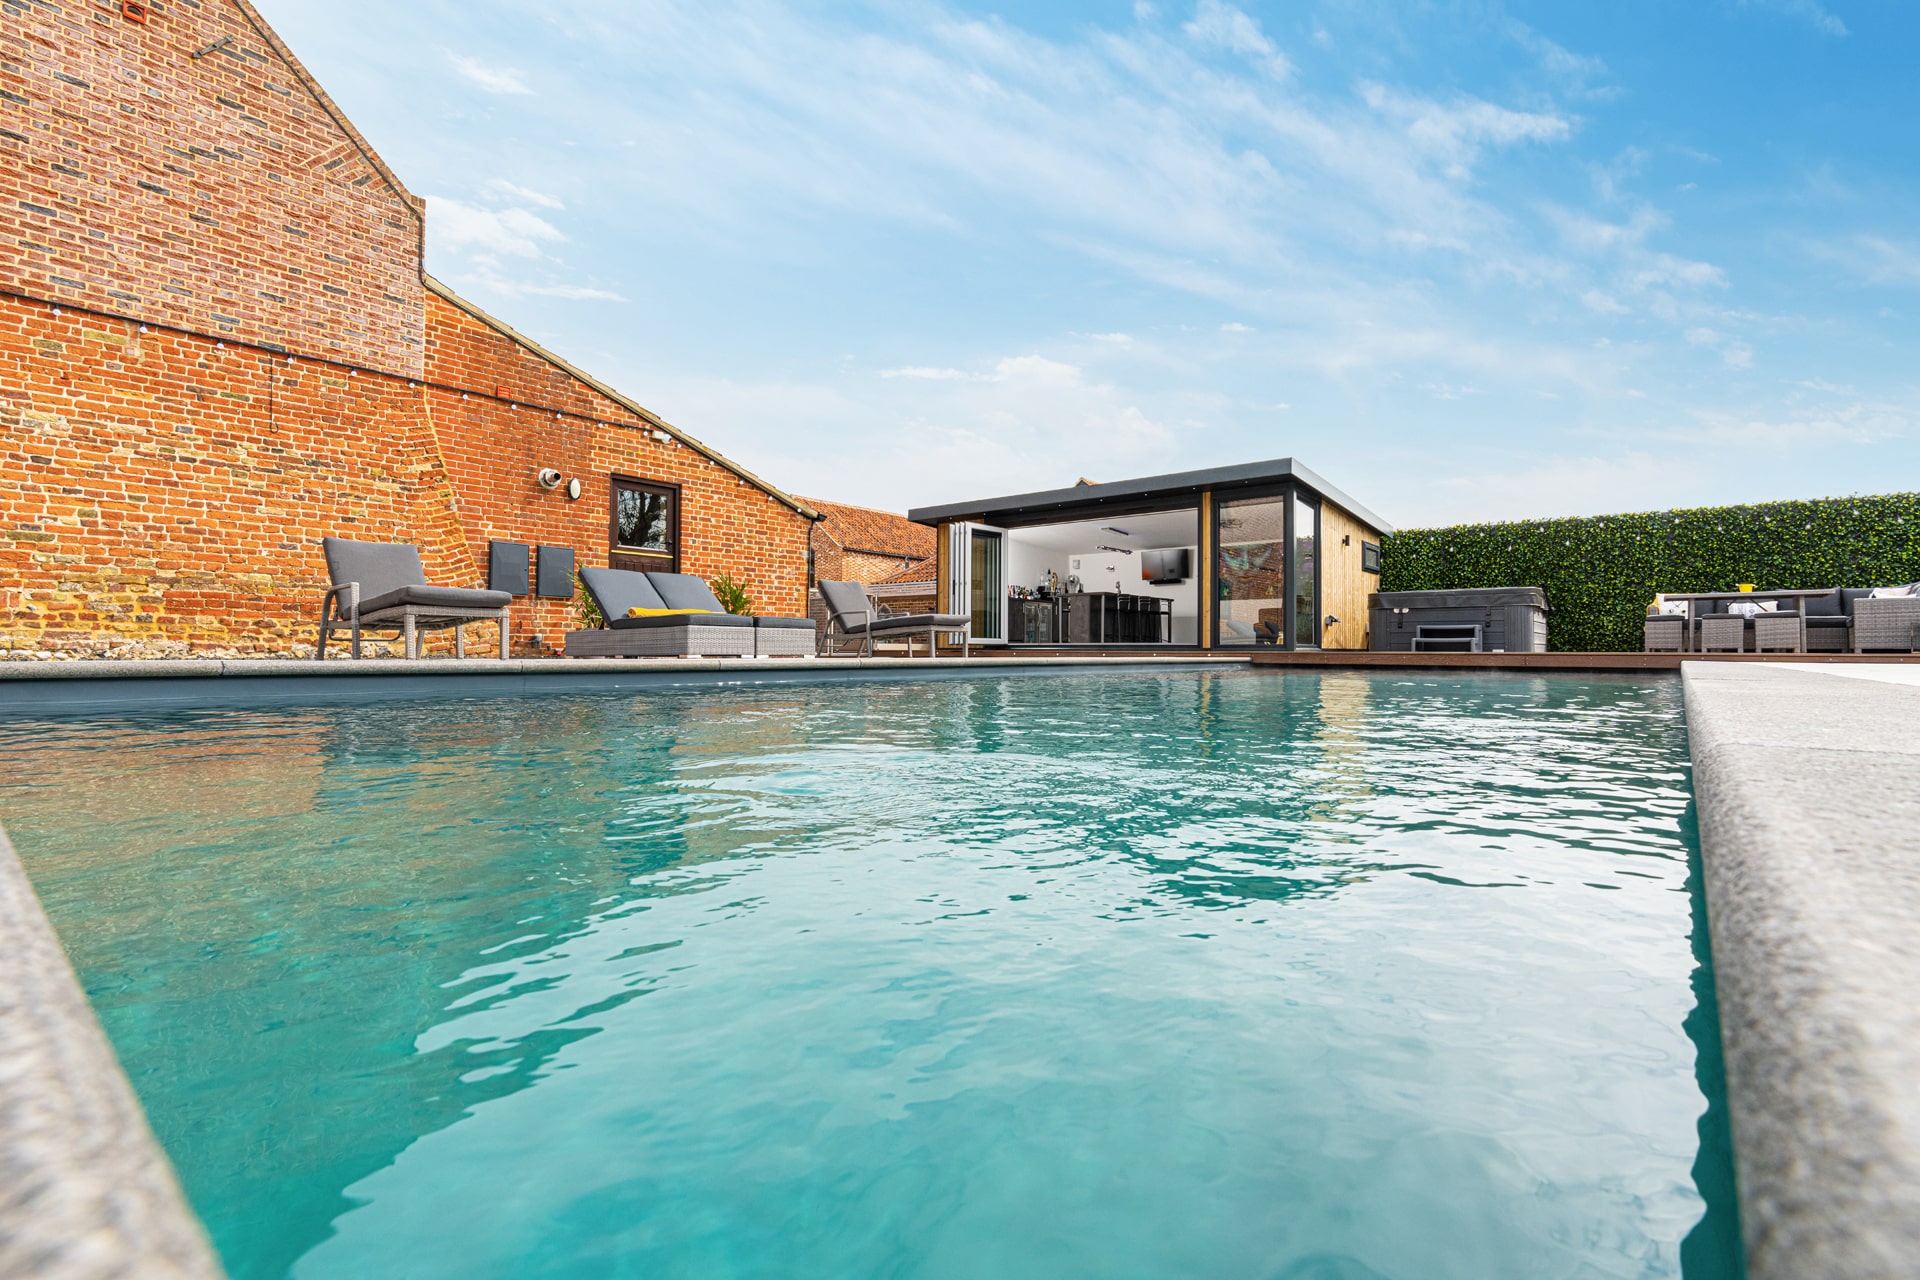 Glistening water in sunken swimming pool with home bar garden room in the background.